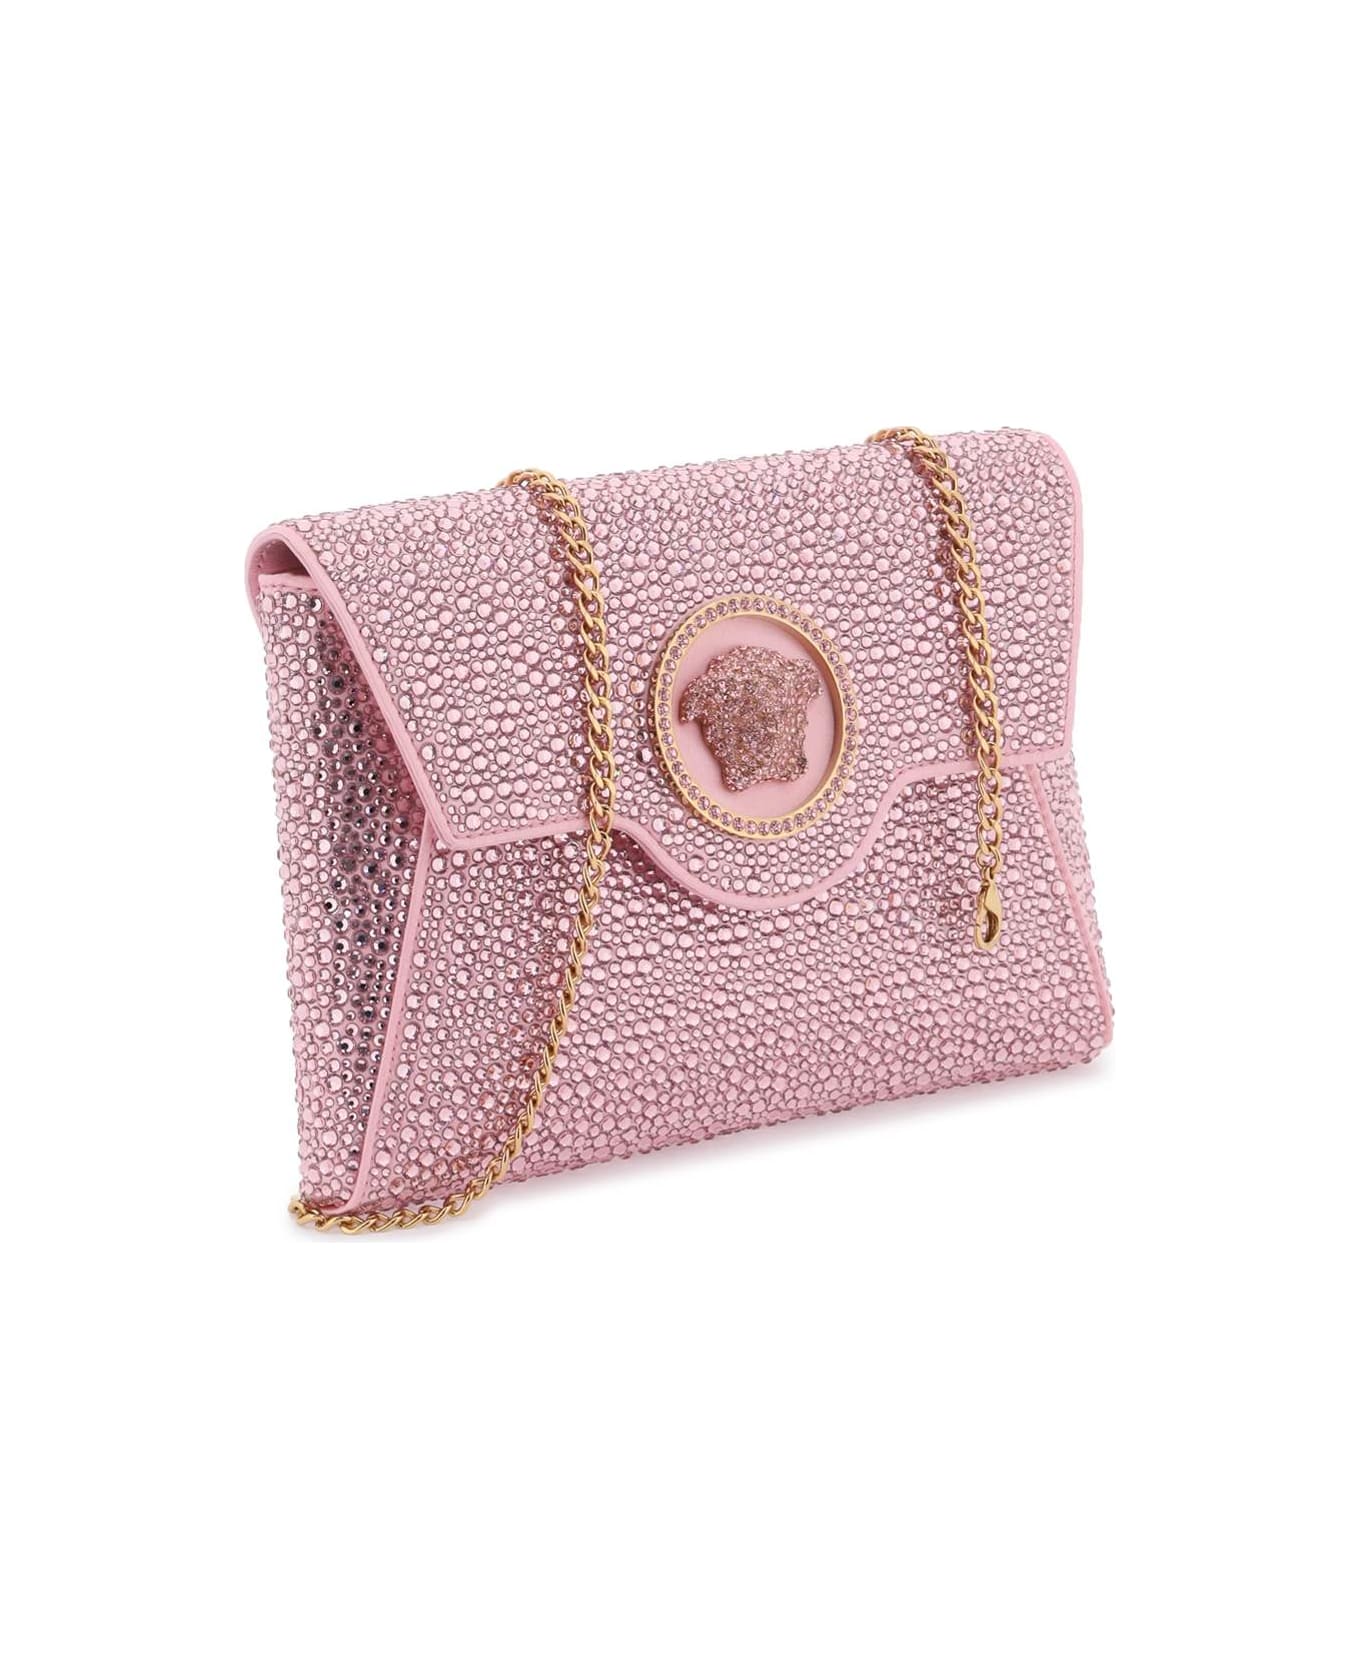 Versace La Medusa Envelope Clutch With Crystals - PALE PINK VERSACE GOLD ショルダーバッグ